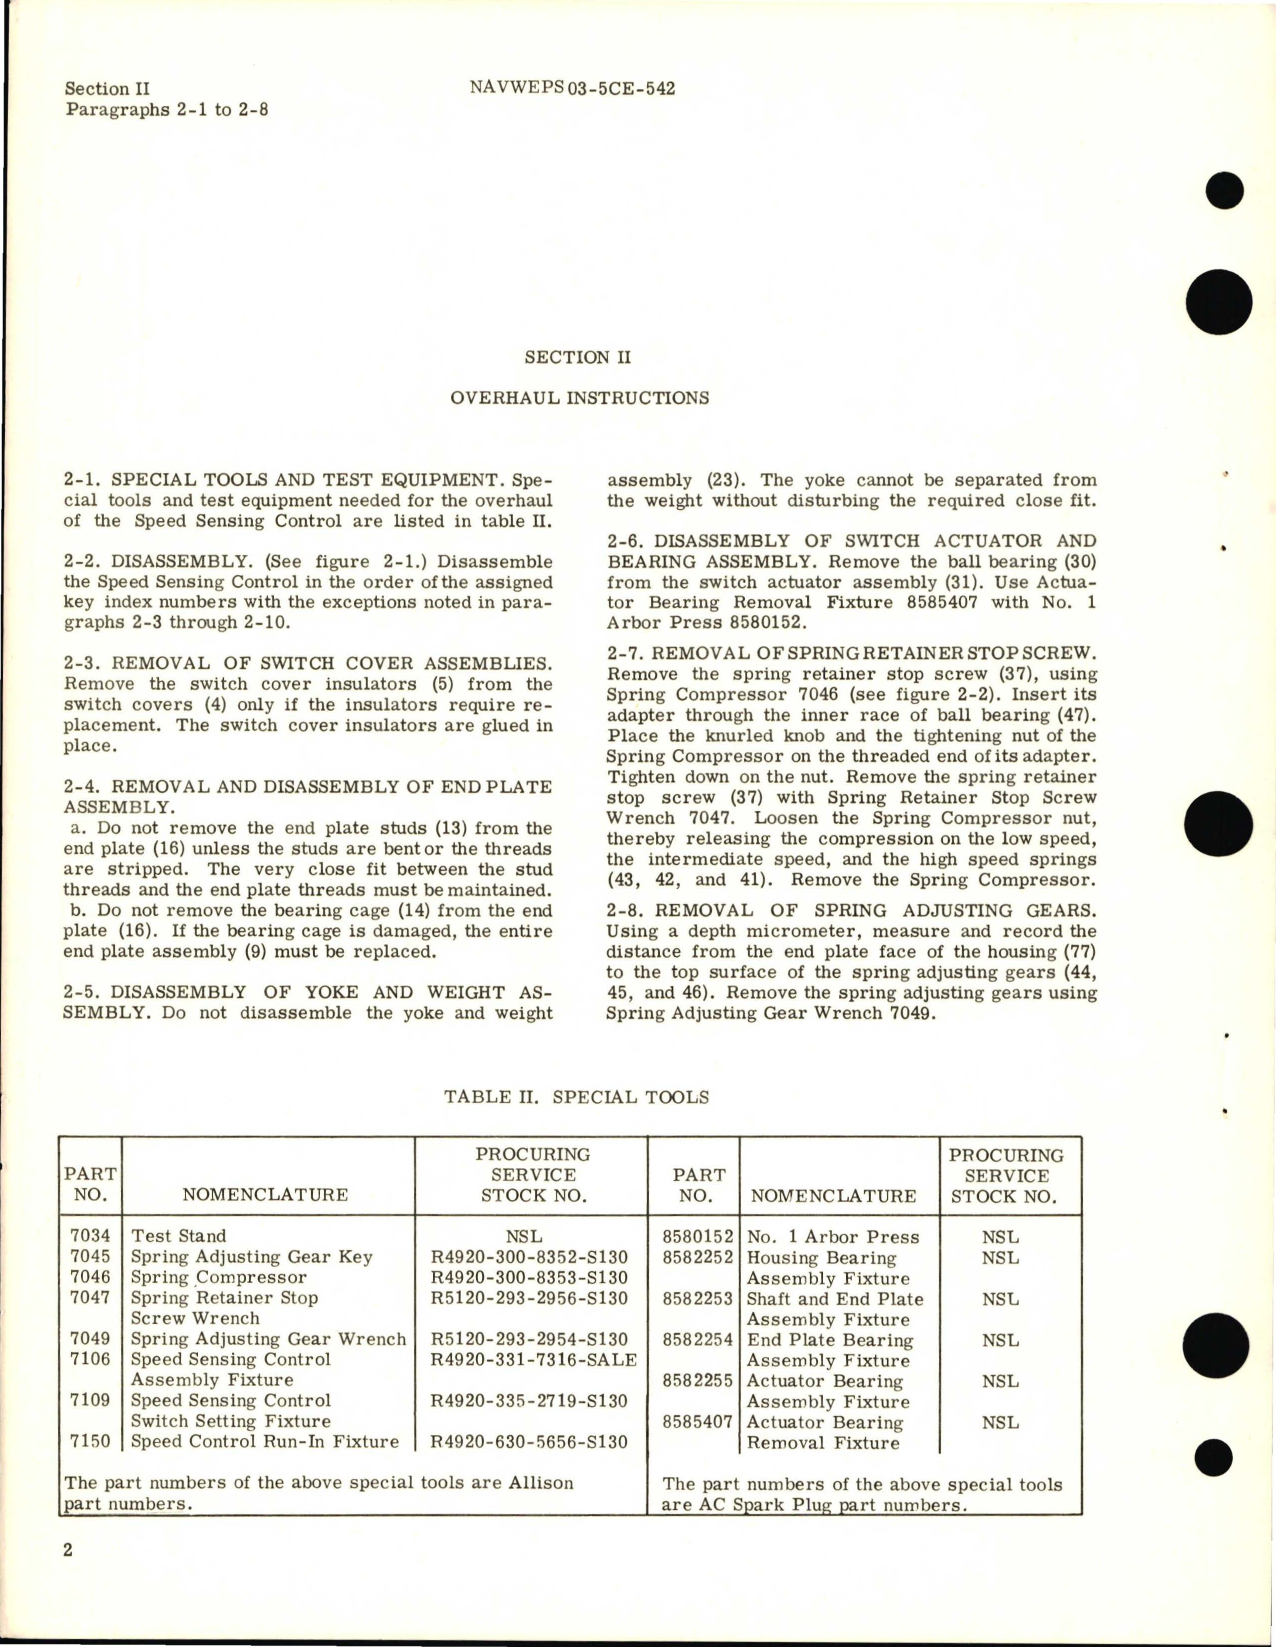 Sample page 6 from AirCorps Library document: Overhaul Instructions for Speed Sensing Control Assembly 8575500 